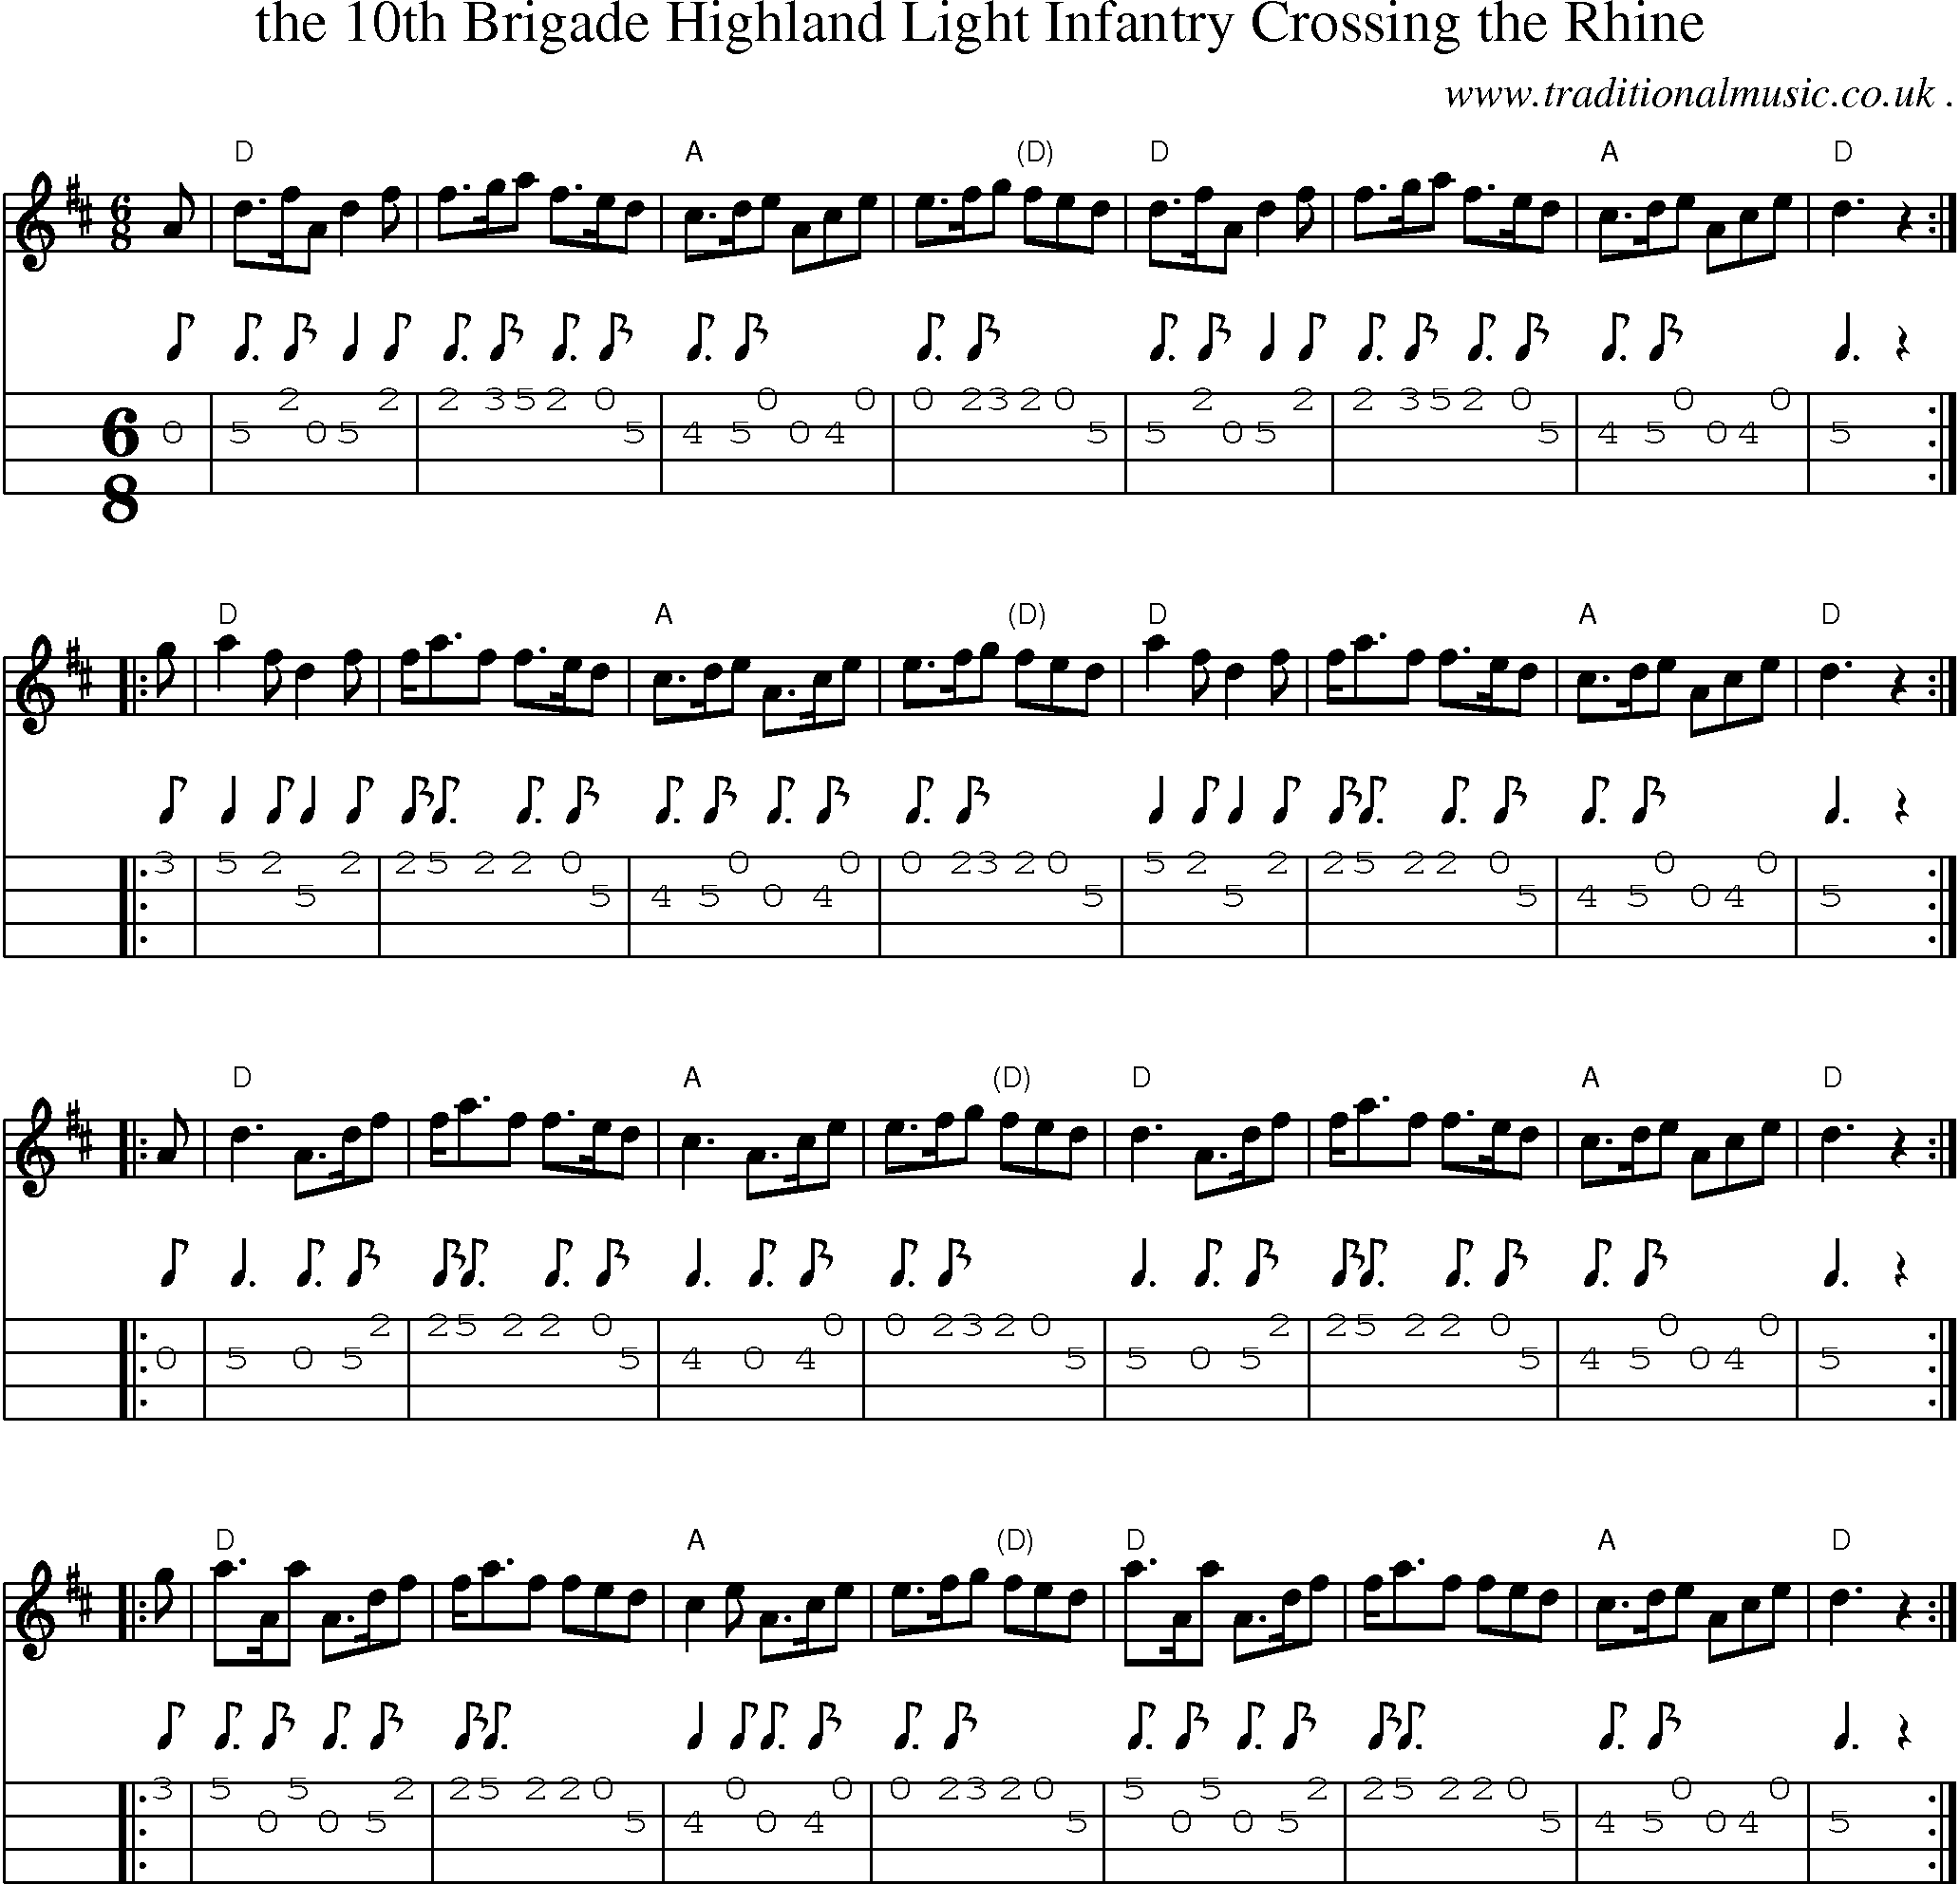 Sheet-music  score, Chords and Mandolin Tabs for The 10th Brigade Highland Light Infantry Crossing The Rhine